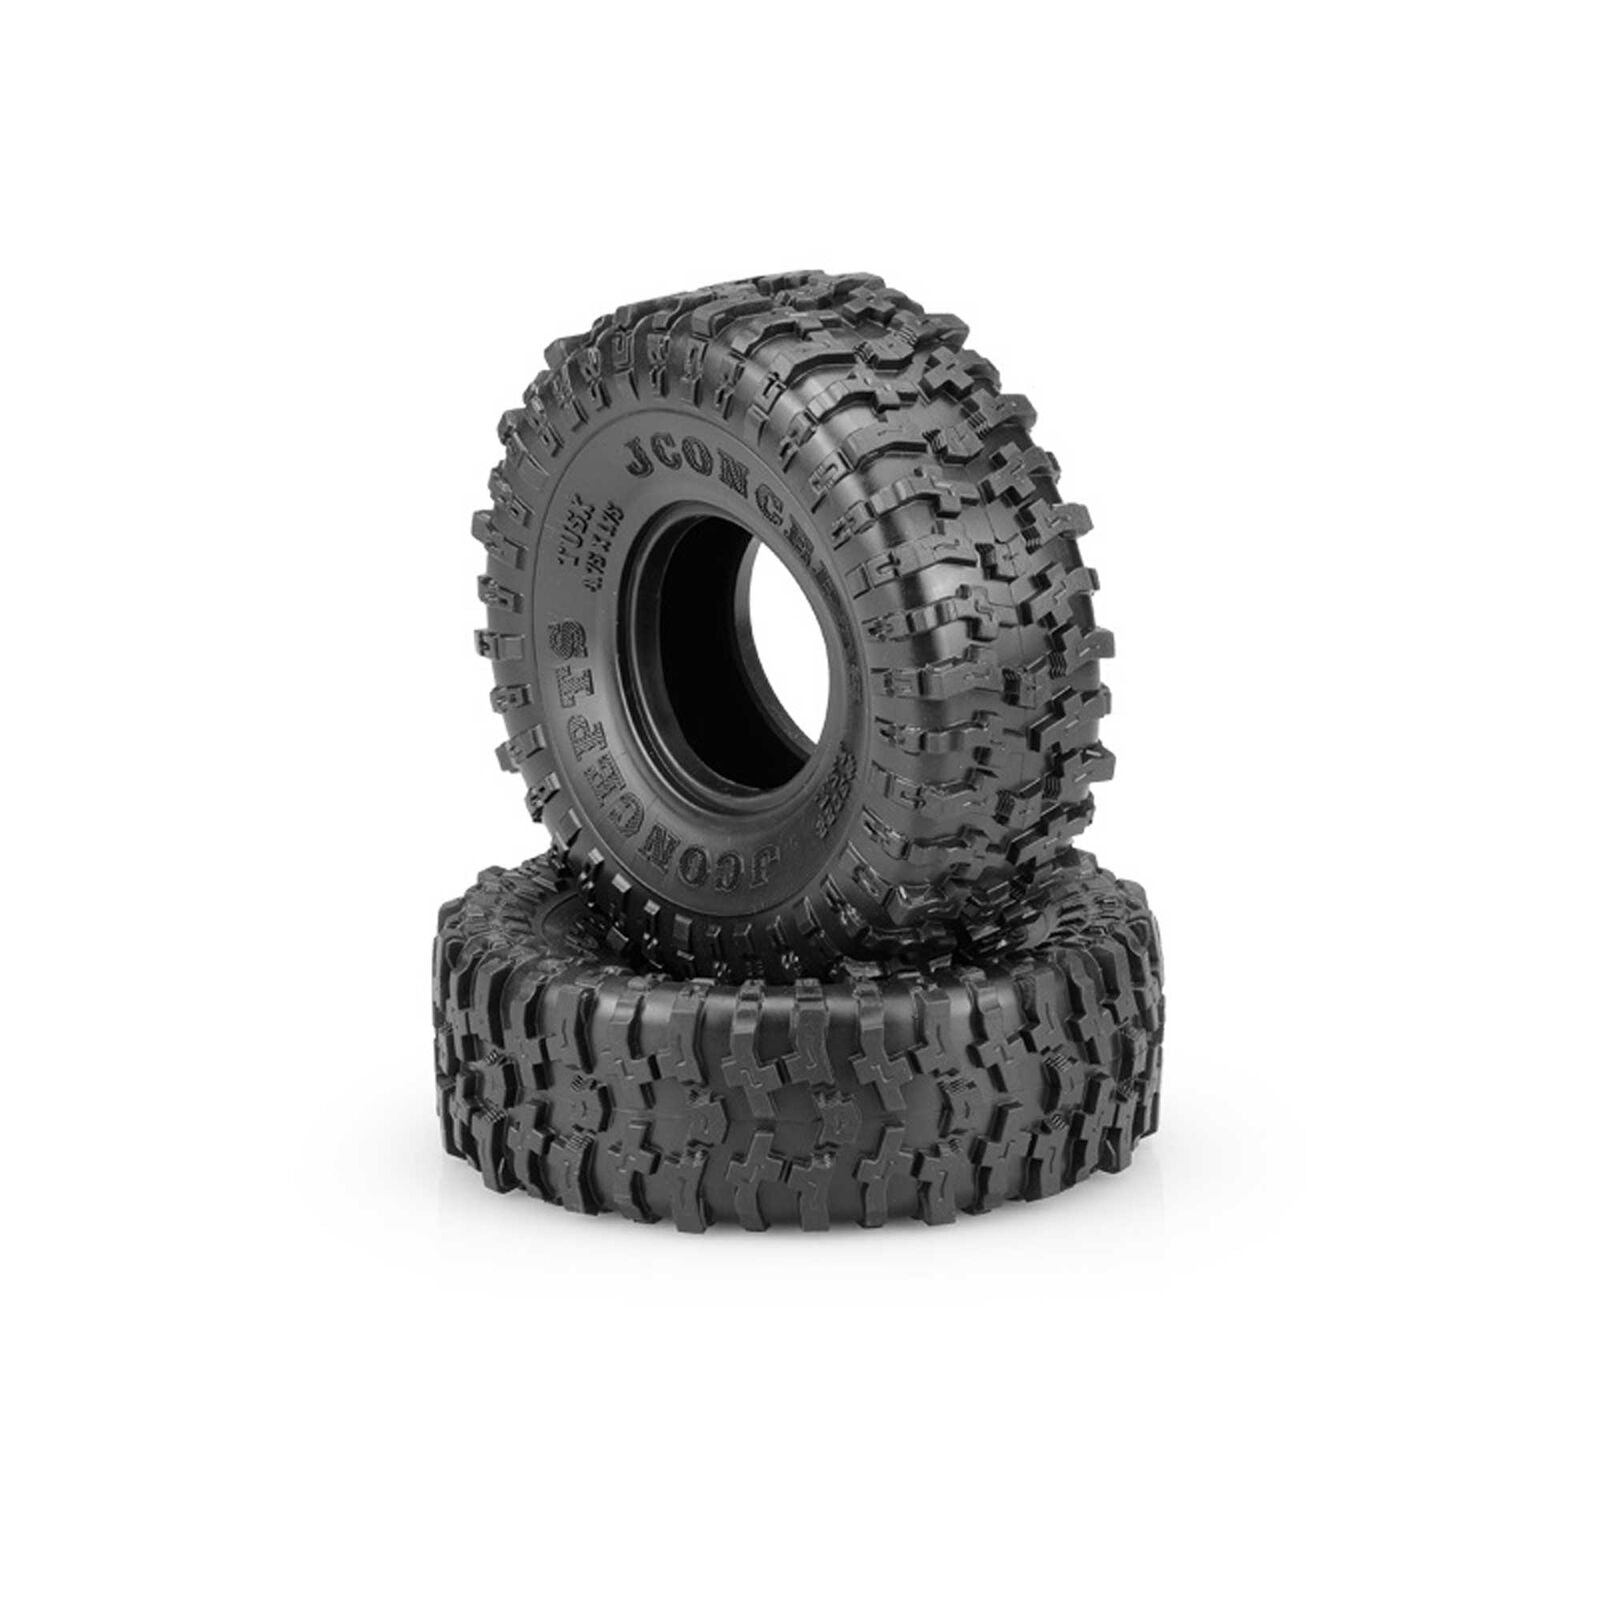 JCONCEPTS 3022-02 Tusk Performance 1.9 Scaler Tires, Green Compound (2)